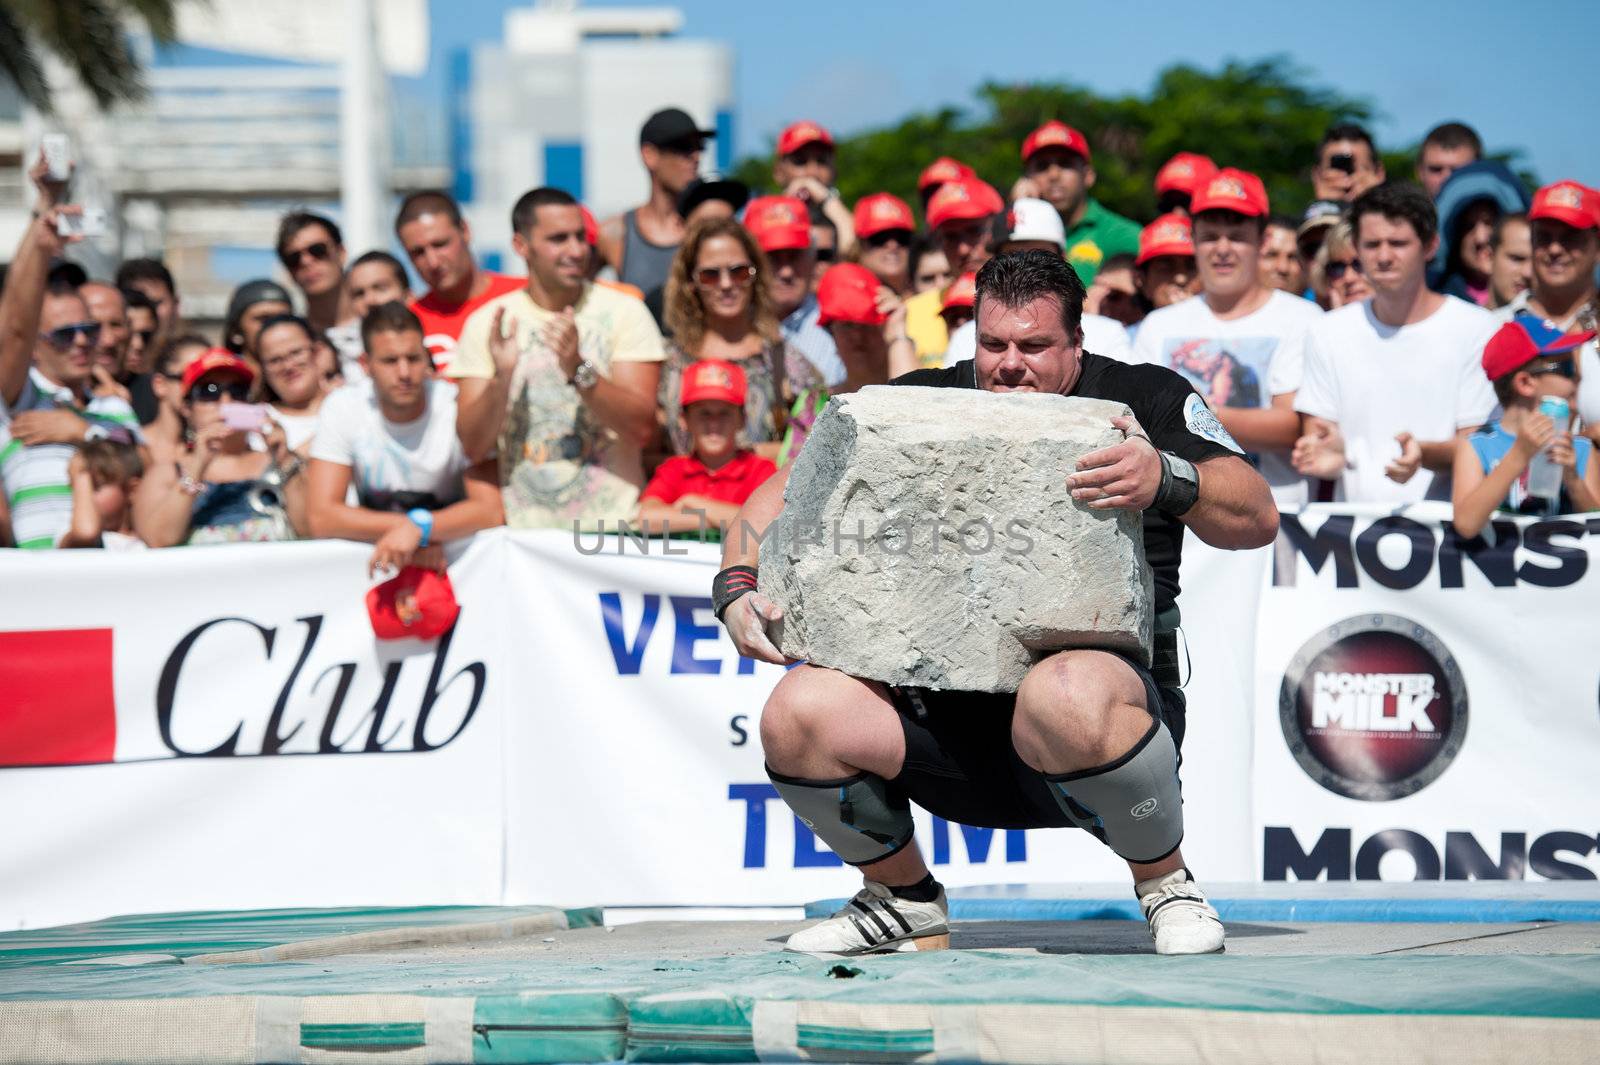 CANARY ISLANDS – SEPTEMBER 03: Alex Curletto from Italy lifting a heavy stone during Strongman Champions League in Las Palmas September 03, 2011 in Canary Islands, Spain